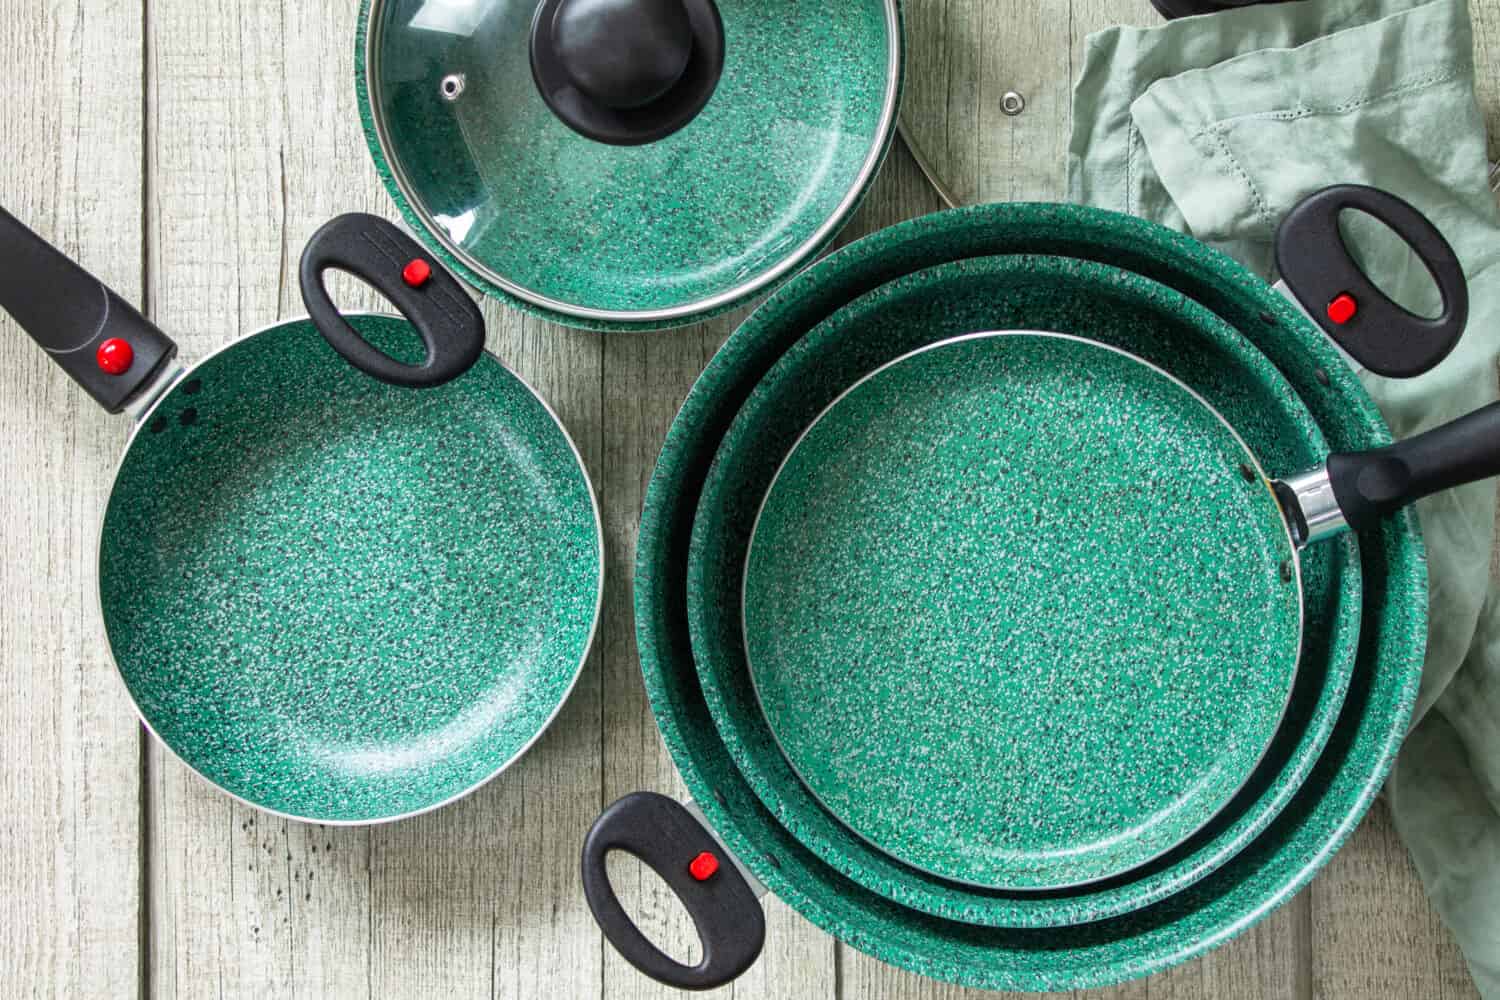 6 Reasons to Start Cooking With Ceramic